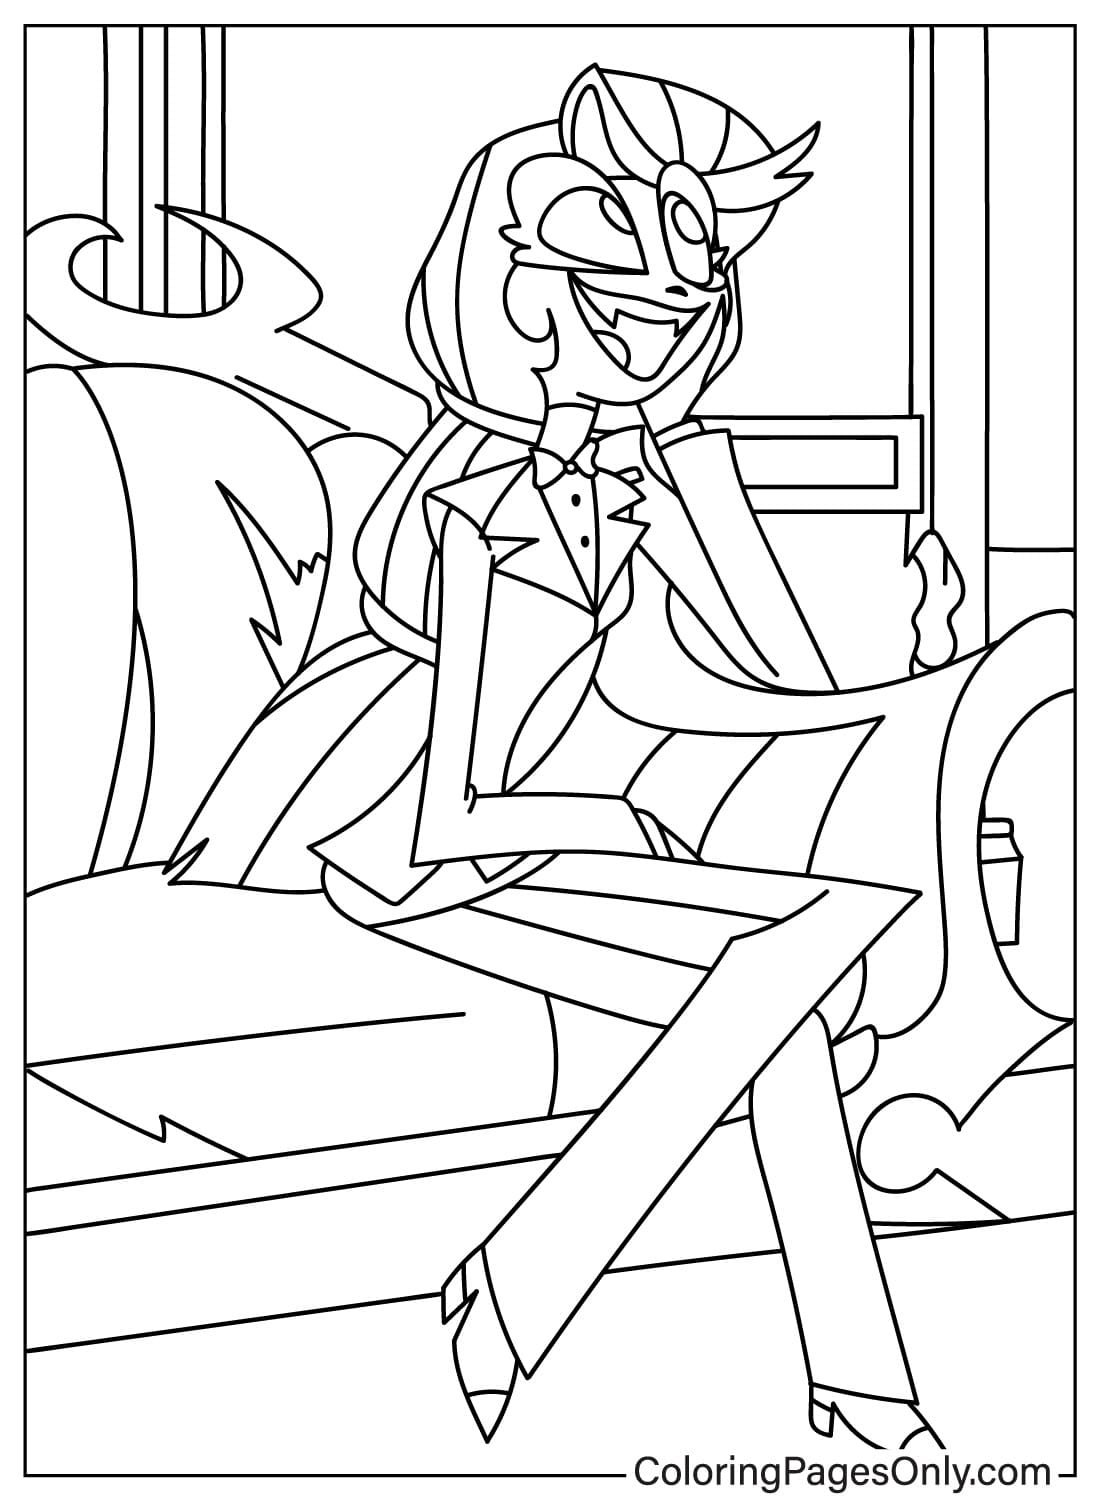 Coloring Page Images Charlie Morningstar from Hazbin Hotel